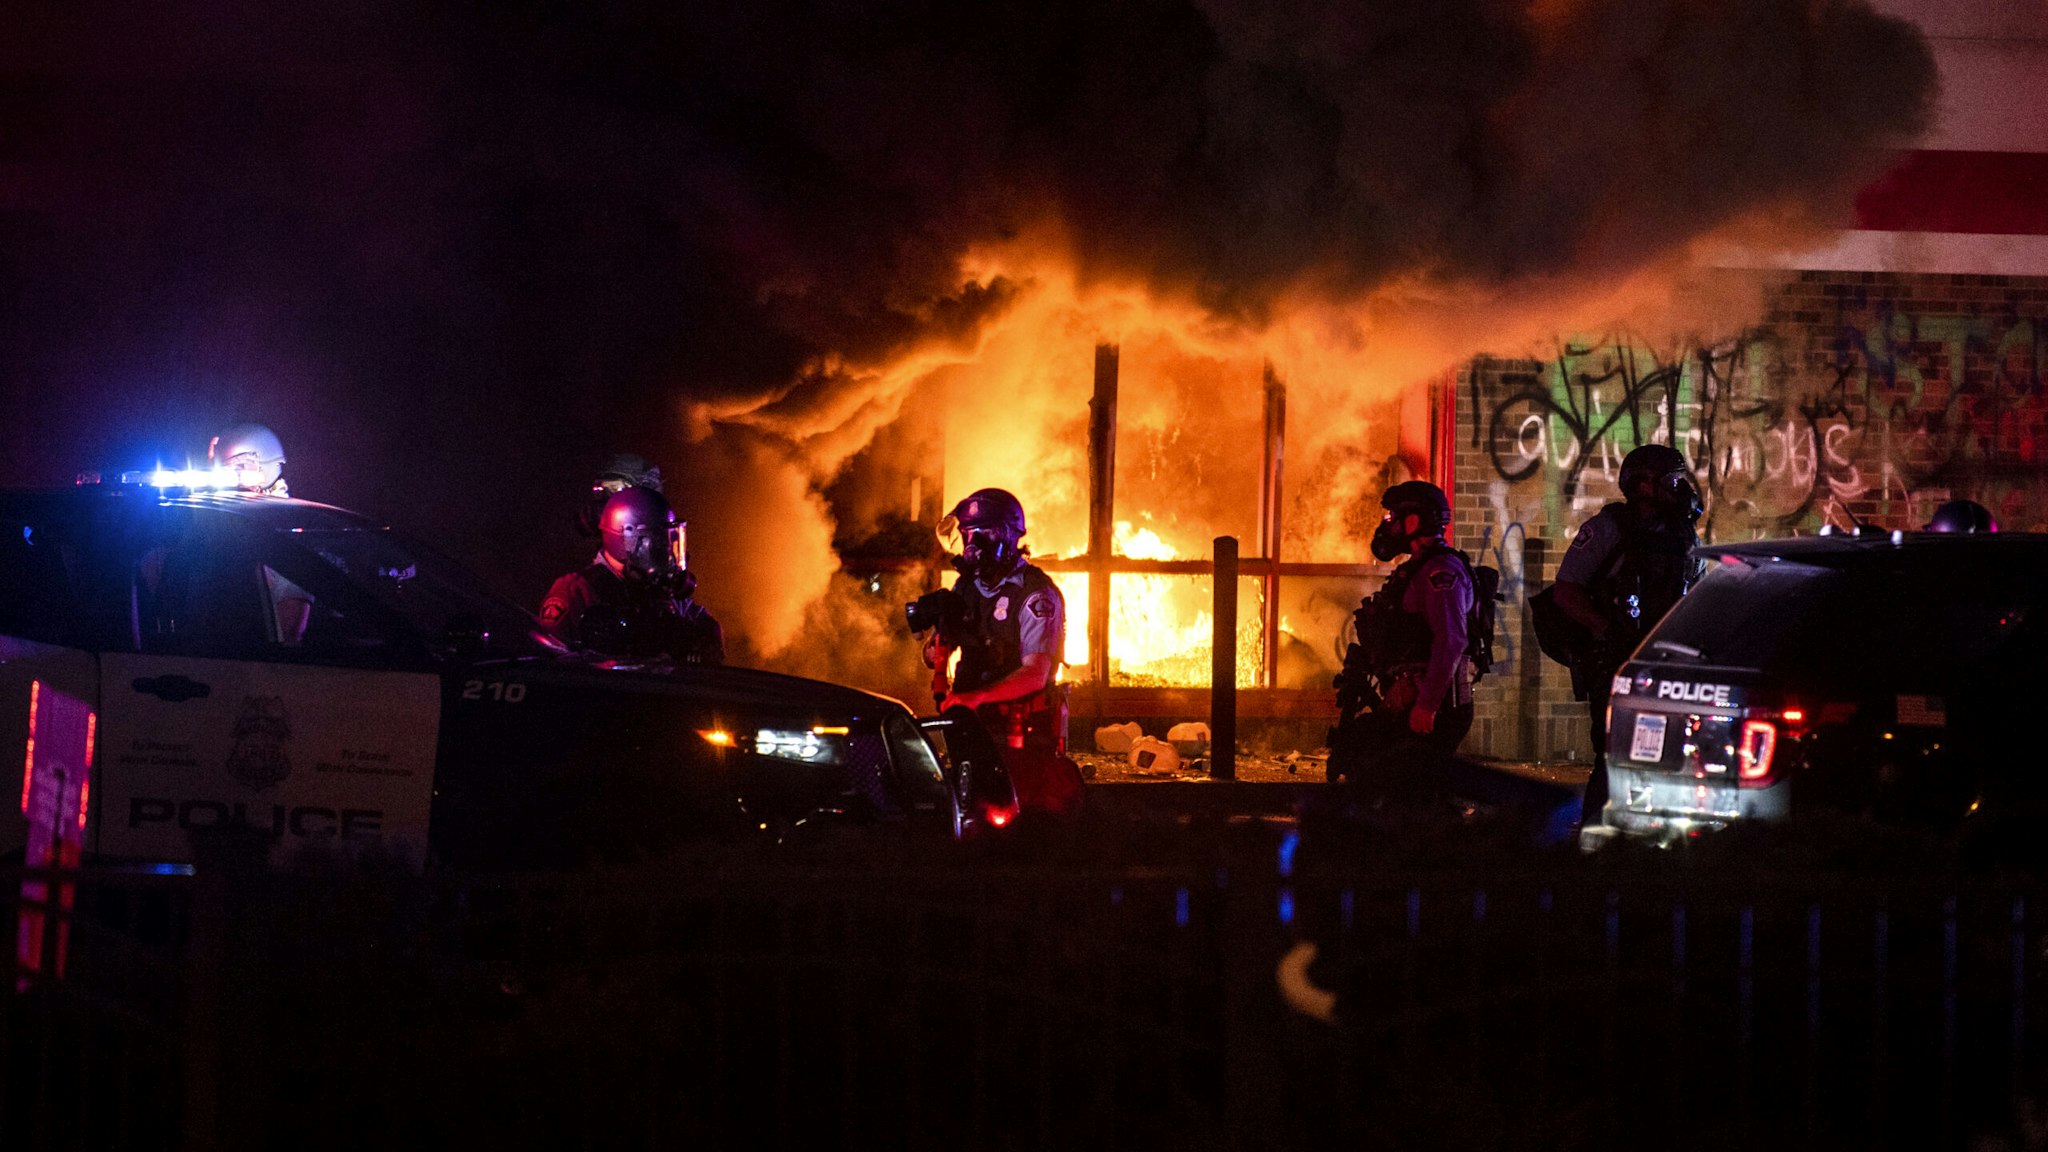 MINNEAPOLIS, MN - MAY 27: A fire burns inside of an Auto Zone store near the Third Police Precinct on May 27, 2020 in Minneapolis, Minnesota. Businesses near the Third Police Precinct were looted and damaged today as the area has become the site of an ongoing protest after the police killing of George Floyd. Four Minneapolis police officers have been fired after a video taken by a bystander was posted on social media showing Floyd's neck being pinned to the ground by an officer as he repeatedly said, "I can’t breathe". Floyd was later pronounced dead while in police custody after being transported to Hennepin County Medical Center.